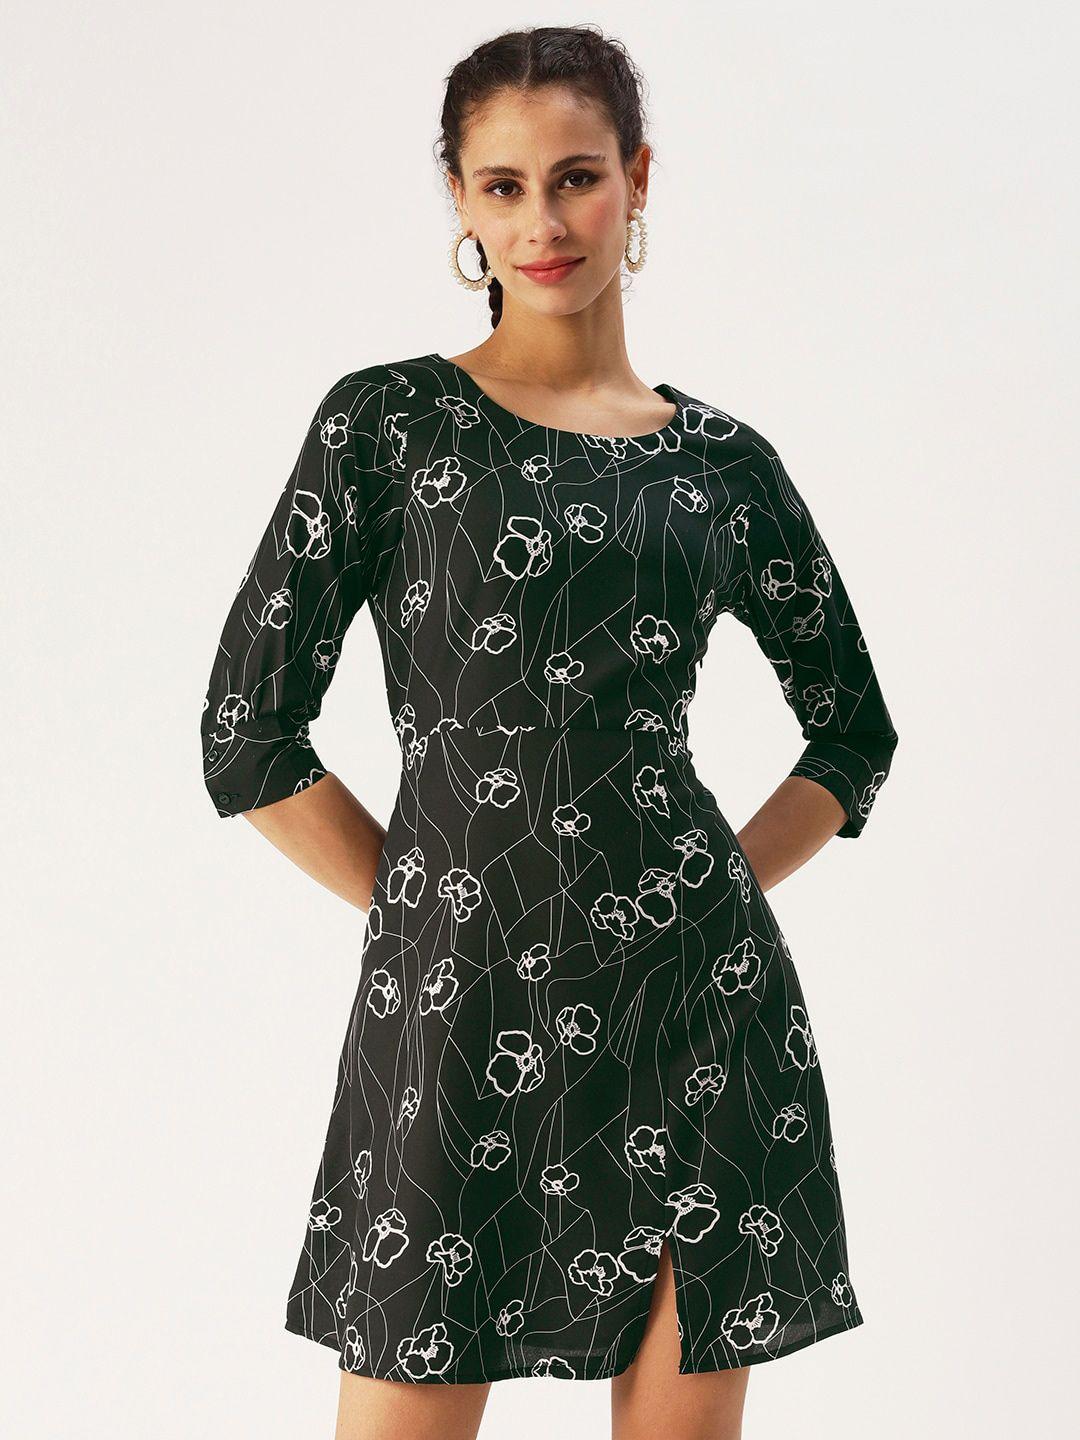 dressberry floral printed round neck a-line dress